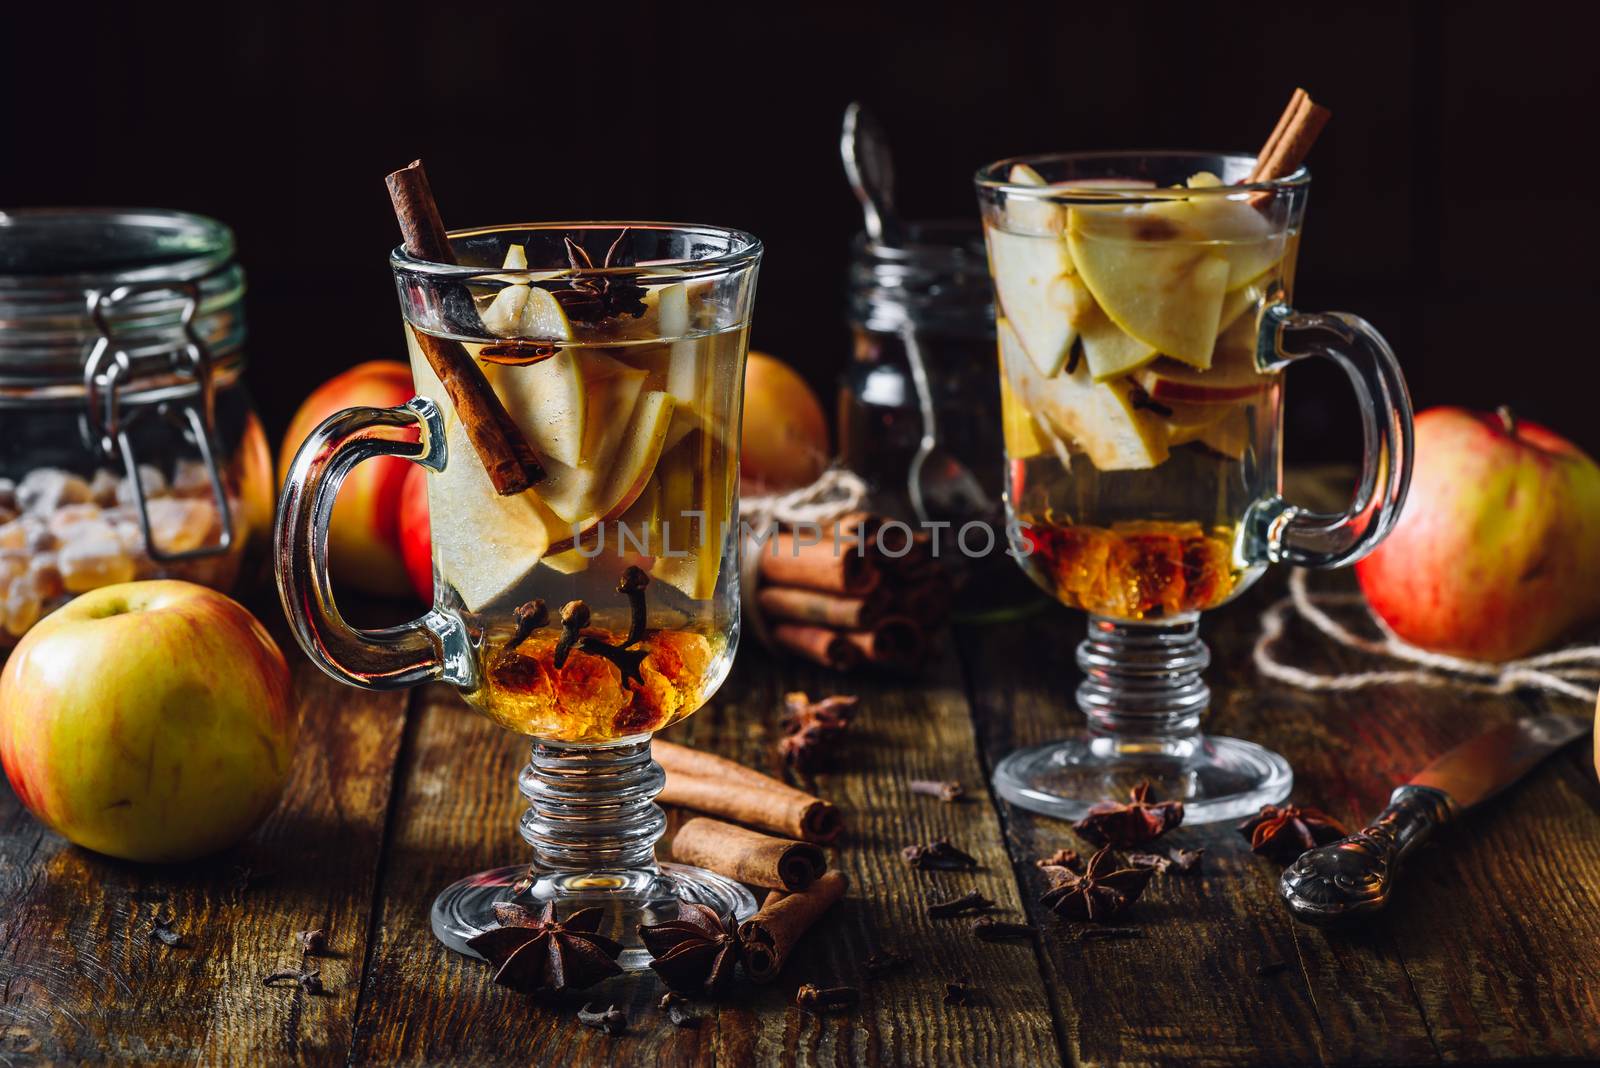 Apple Mulled Beverage with Cinnamon, Anise Star and Clove.